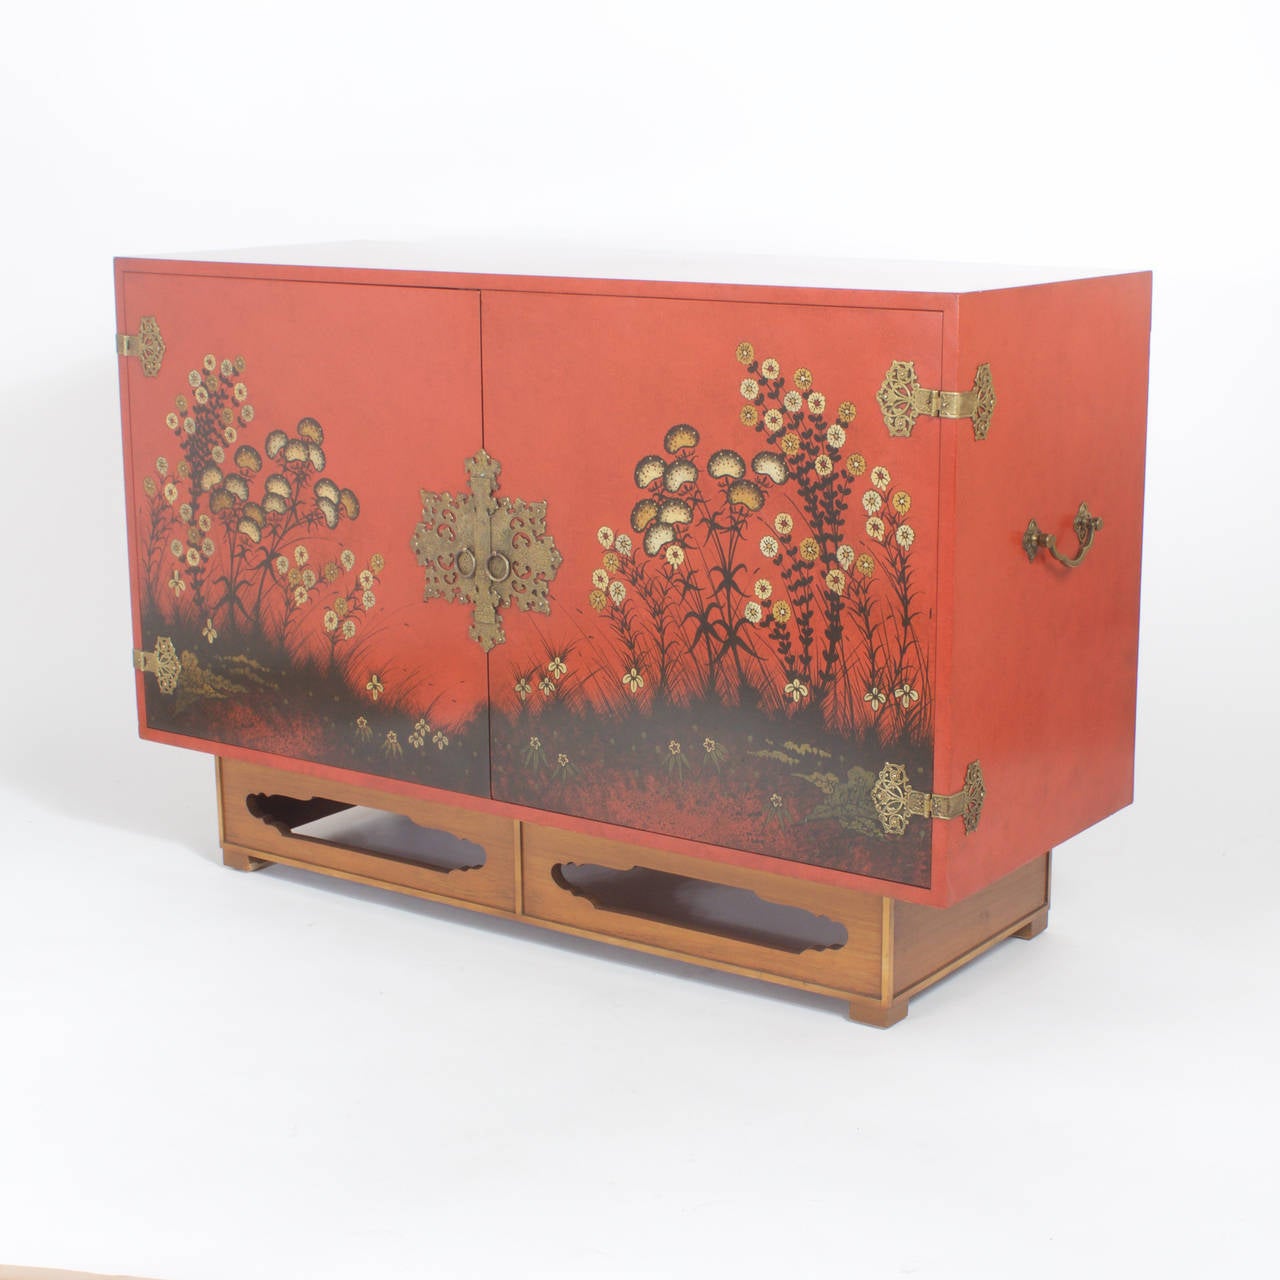 Mid Century red lacquer cabinet with 2 doors and plenty of storage. Perfect for under your flat screen television or to be used as a sideboard or server. Featuring brass Asian modern hardware and Asian style base with the cabinet front decorated in